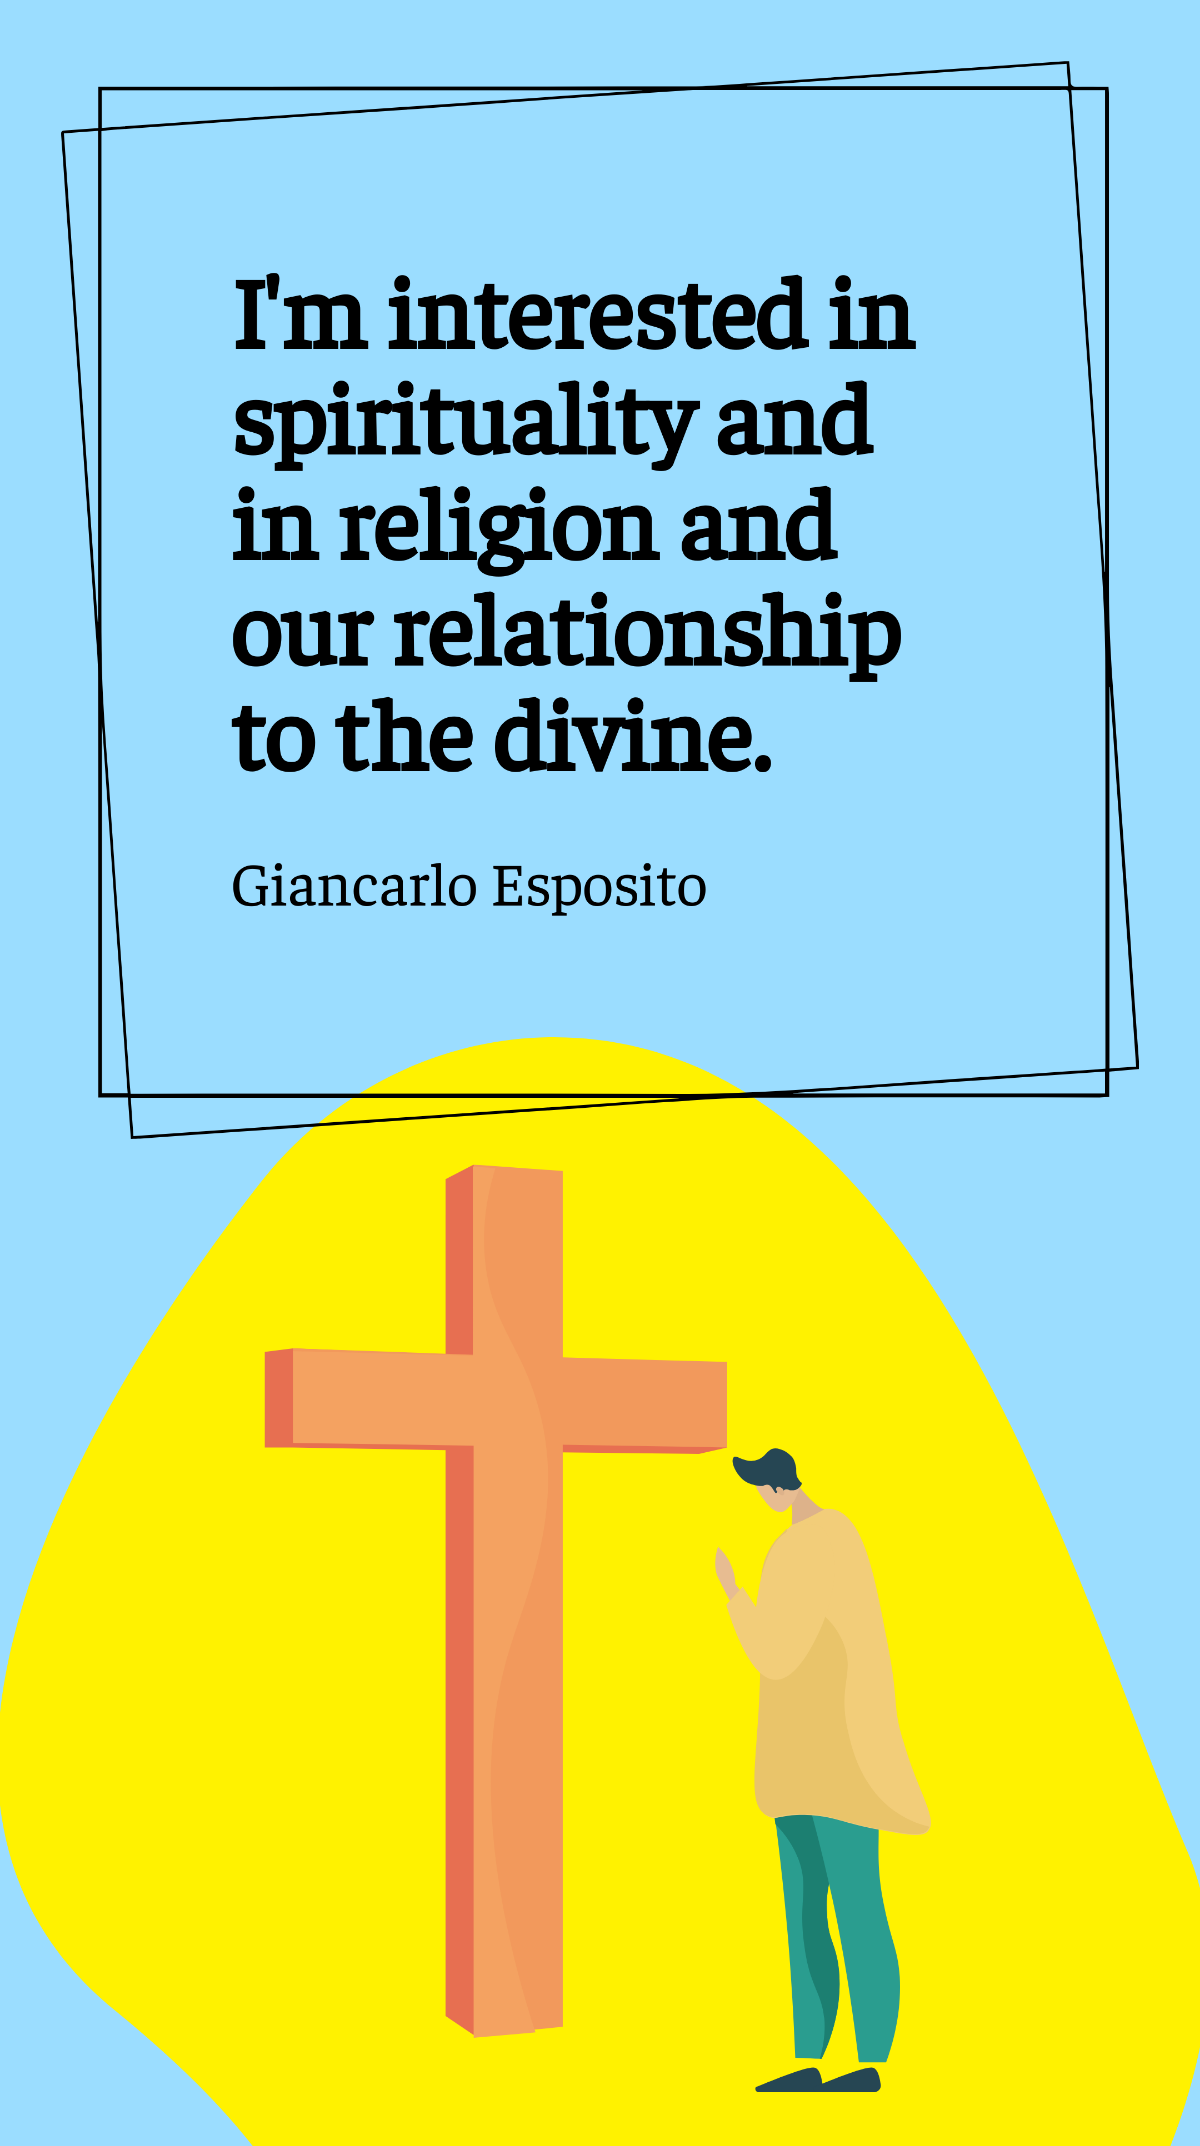 Giancarlo Esposito - I'm interested in spirituality and in religion and our relationship to the divine. Template